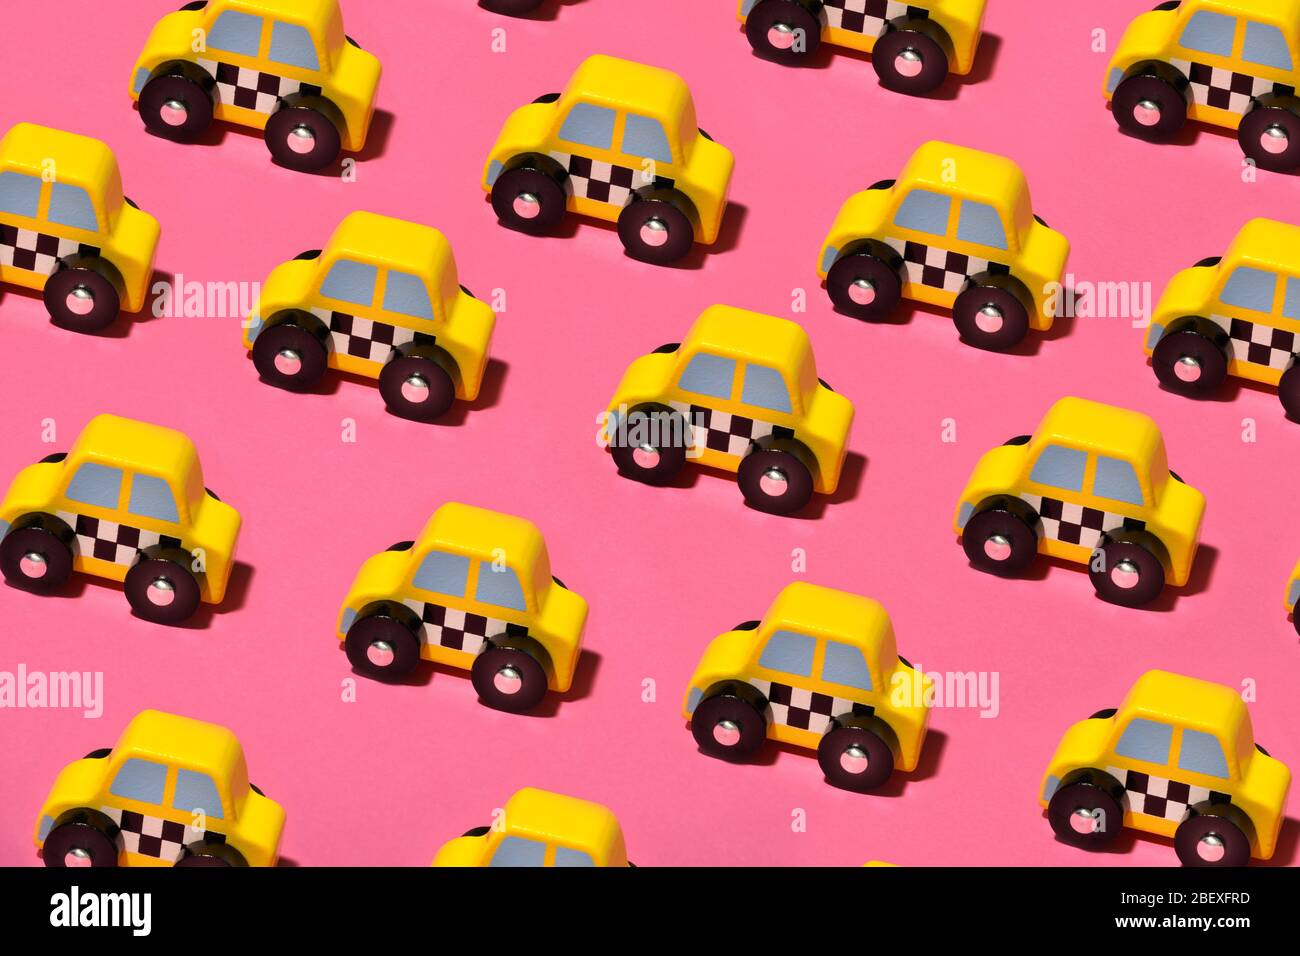 Rows of little yellow toy cabs or taxis on a colorful pink background viewed high angle in full frame Stock Photo